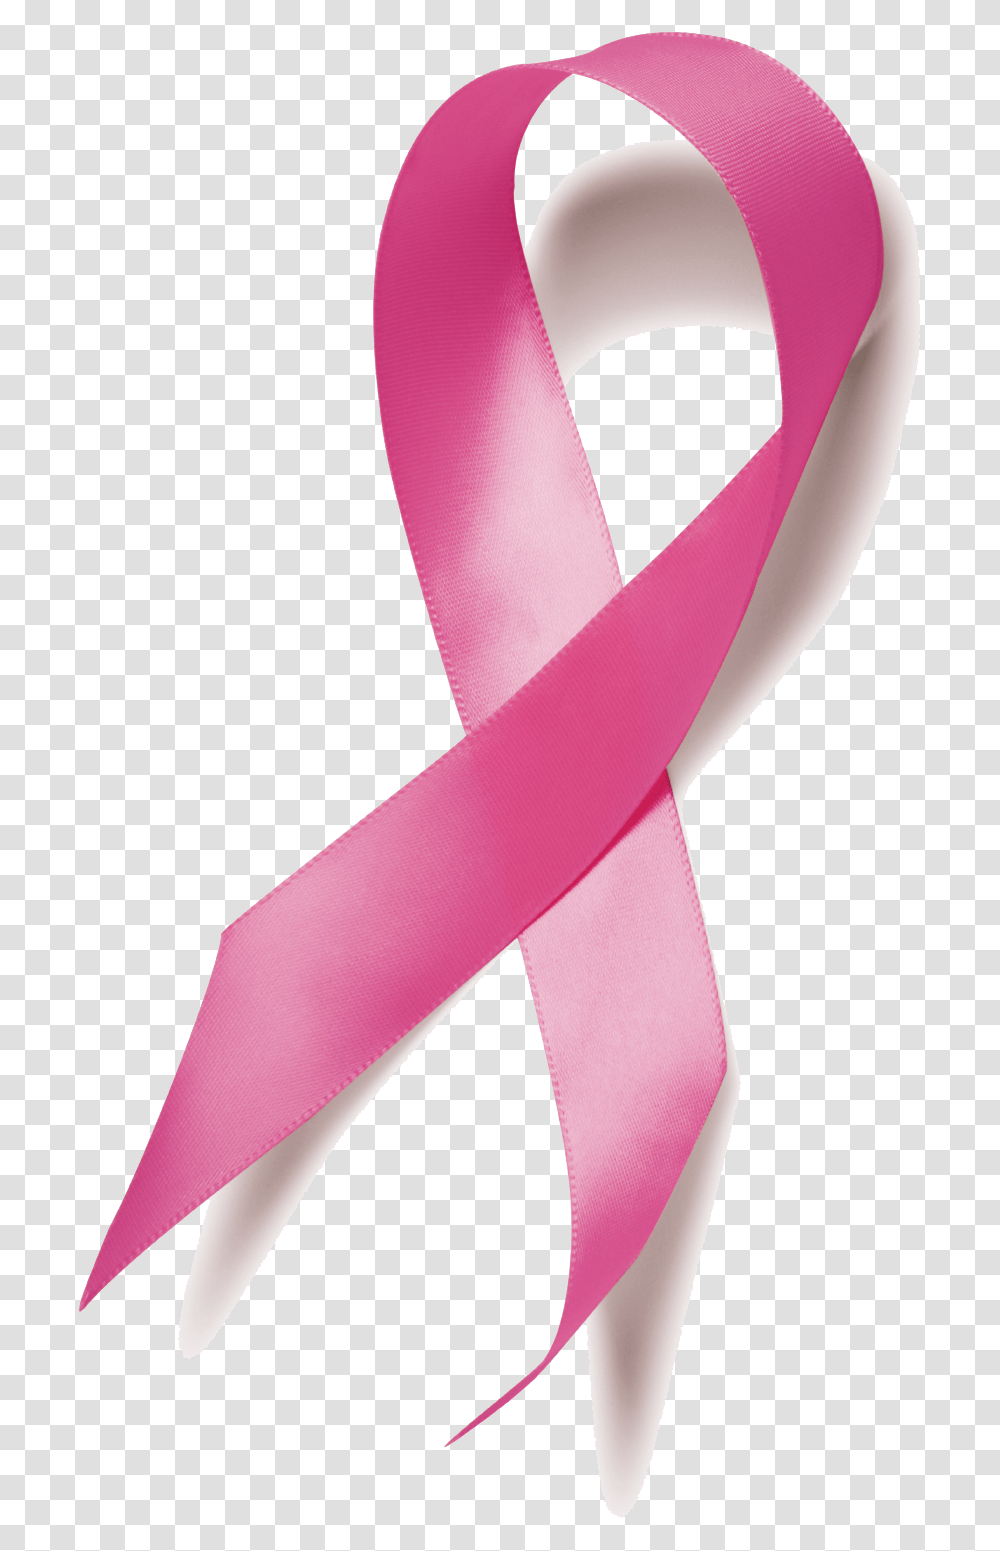 Download Free Breast Cancer Ribbon Breast Cancer Ribbon Realistic, Purple Transparent Png